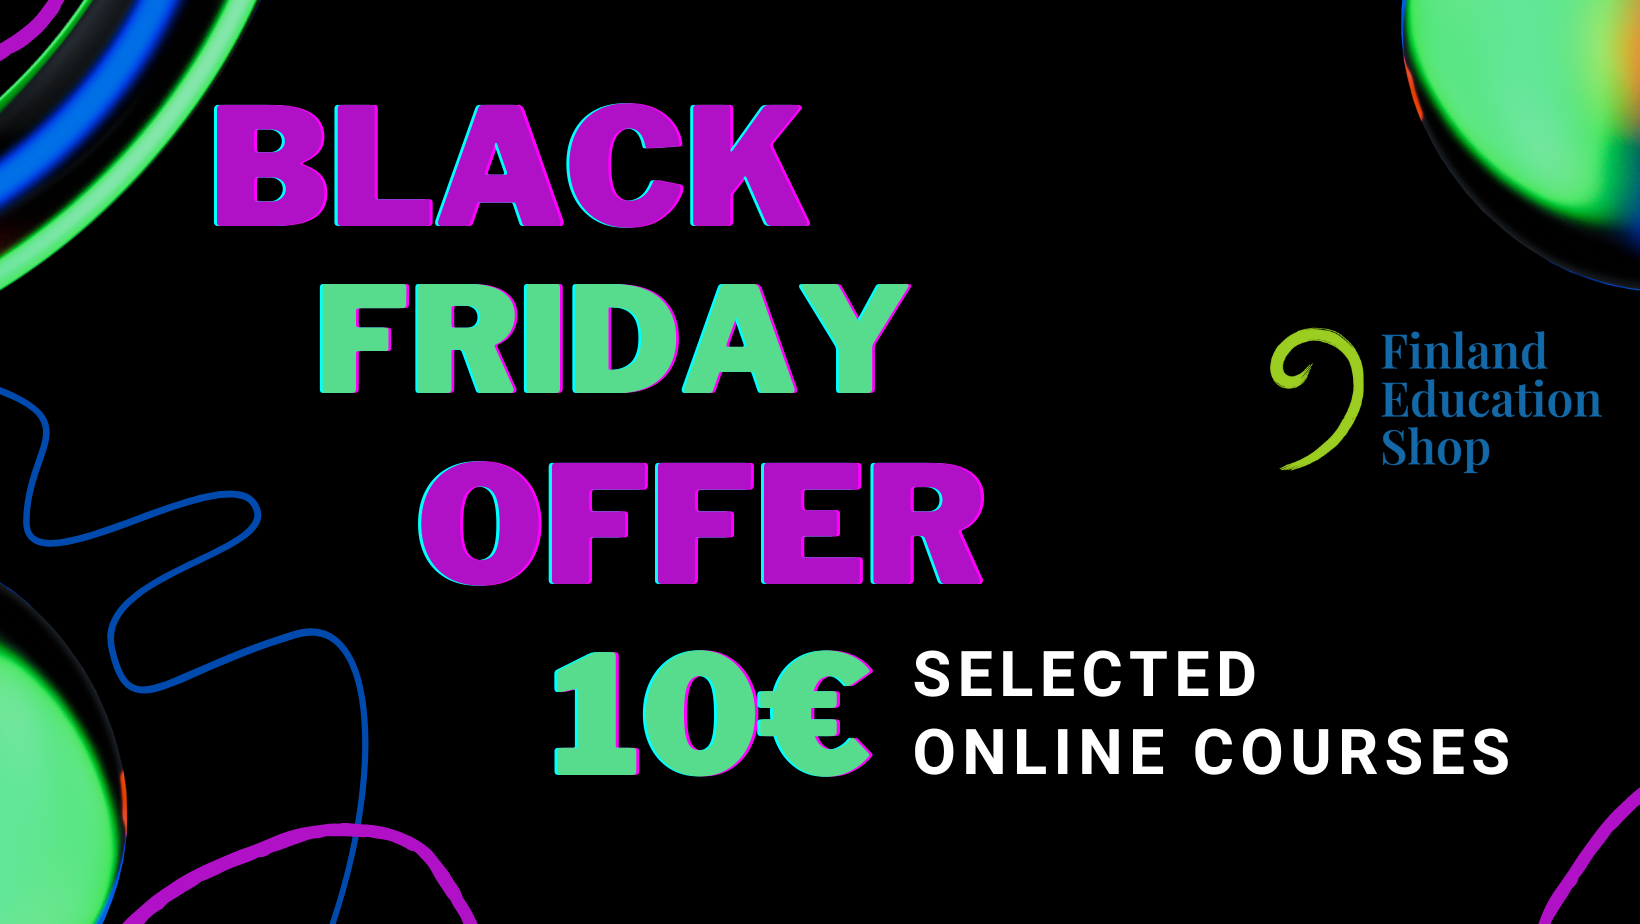 Black Friday offer_cover photo_FES